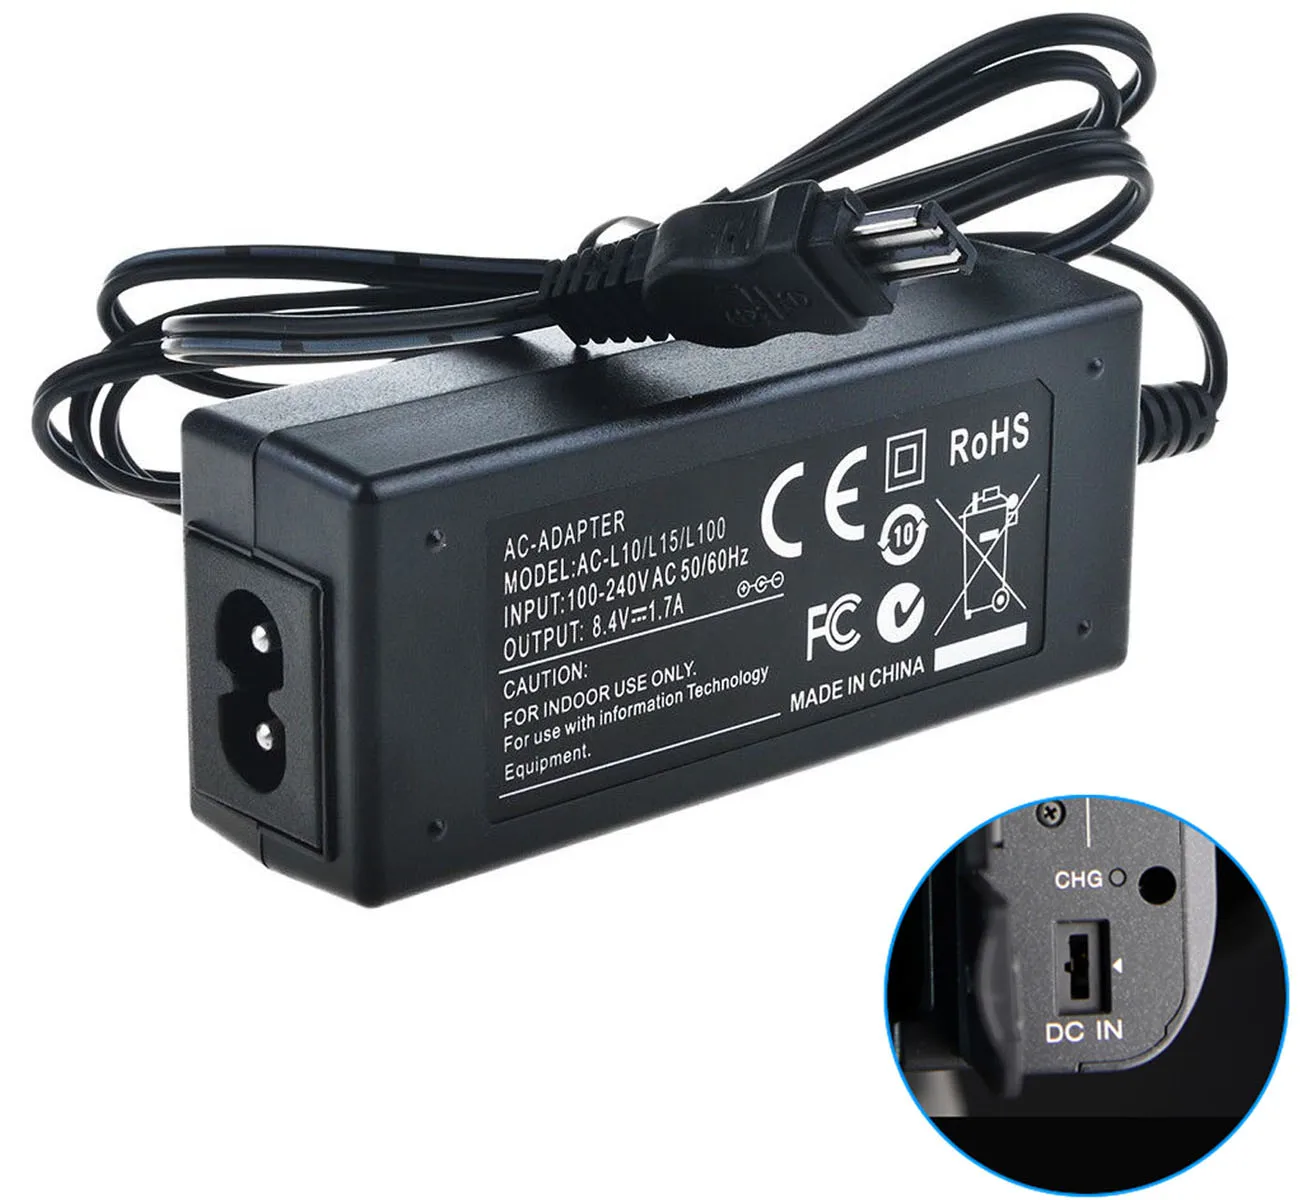 AC Power Adapter Charger for Sony HVR-A1 HVR-A1E HVR-HD1000 HVR-HD1000E HVR-HD1000P HVR-HD1000U HDV Camcorder | Электроника - Фото №1